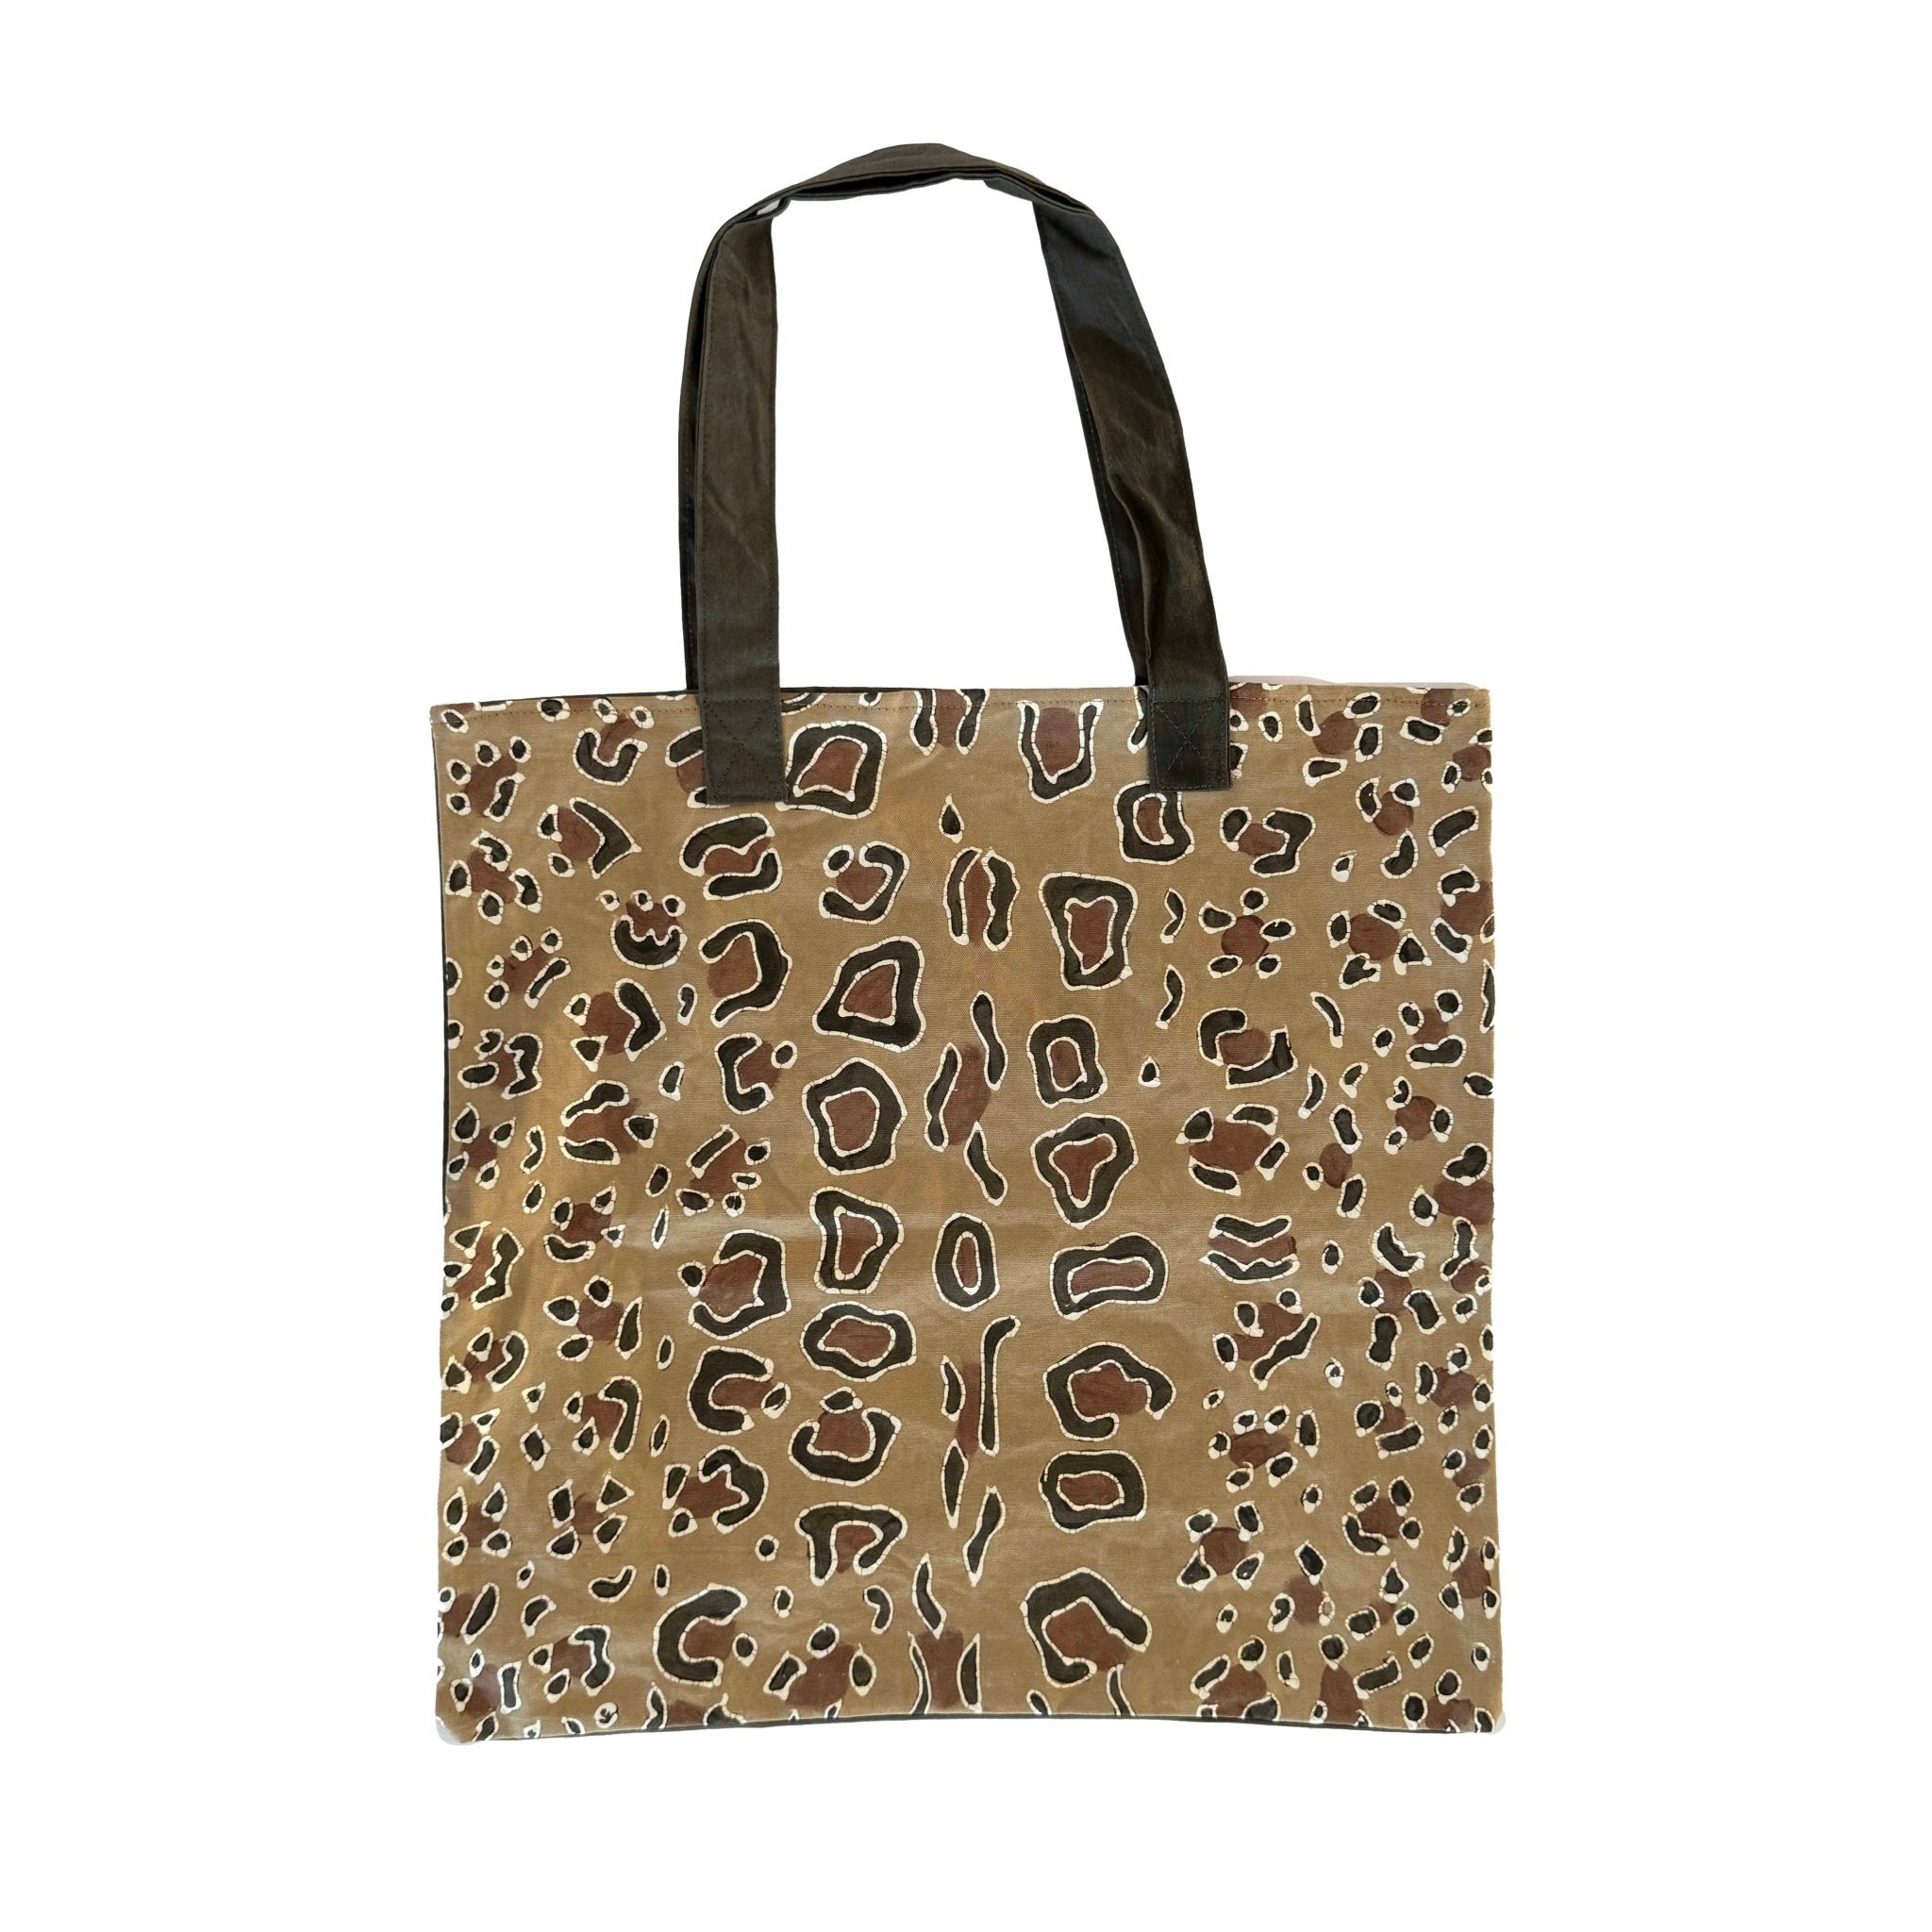 Mkupo Leopard Print Tote Bag - Accessories by TRIBAL TEXTILES - Handcrafted Home Decor Interiors - African Made